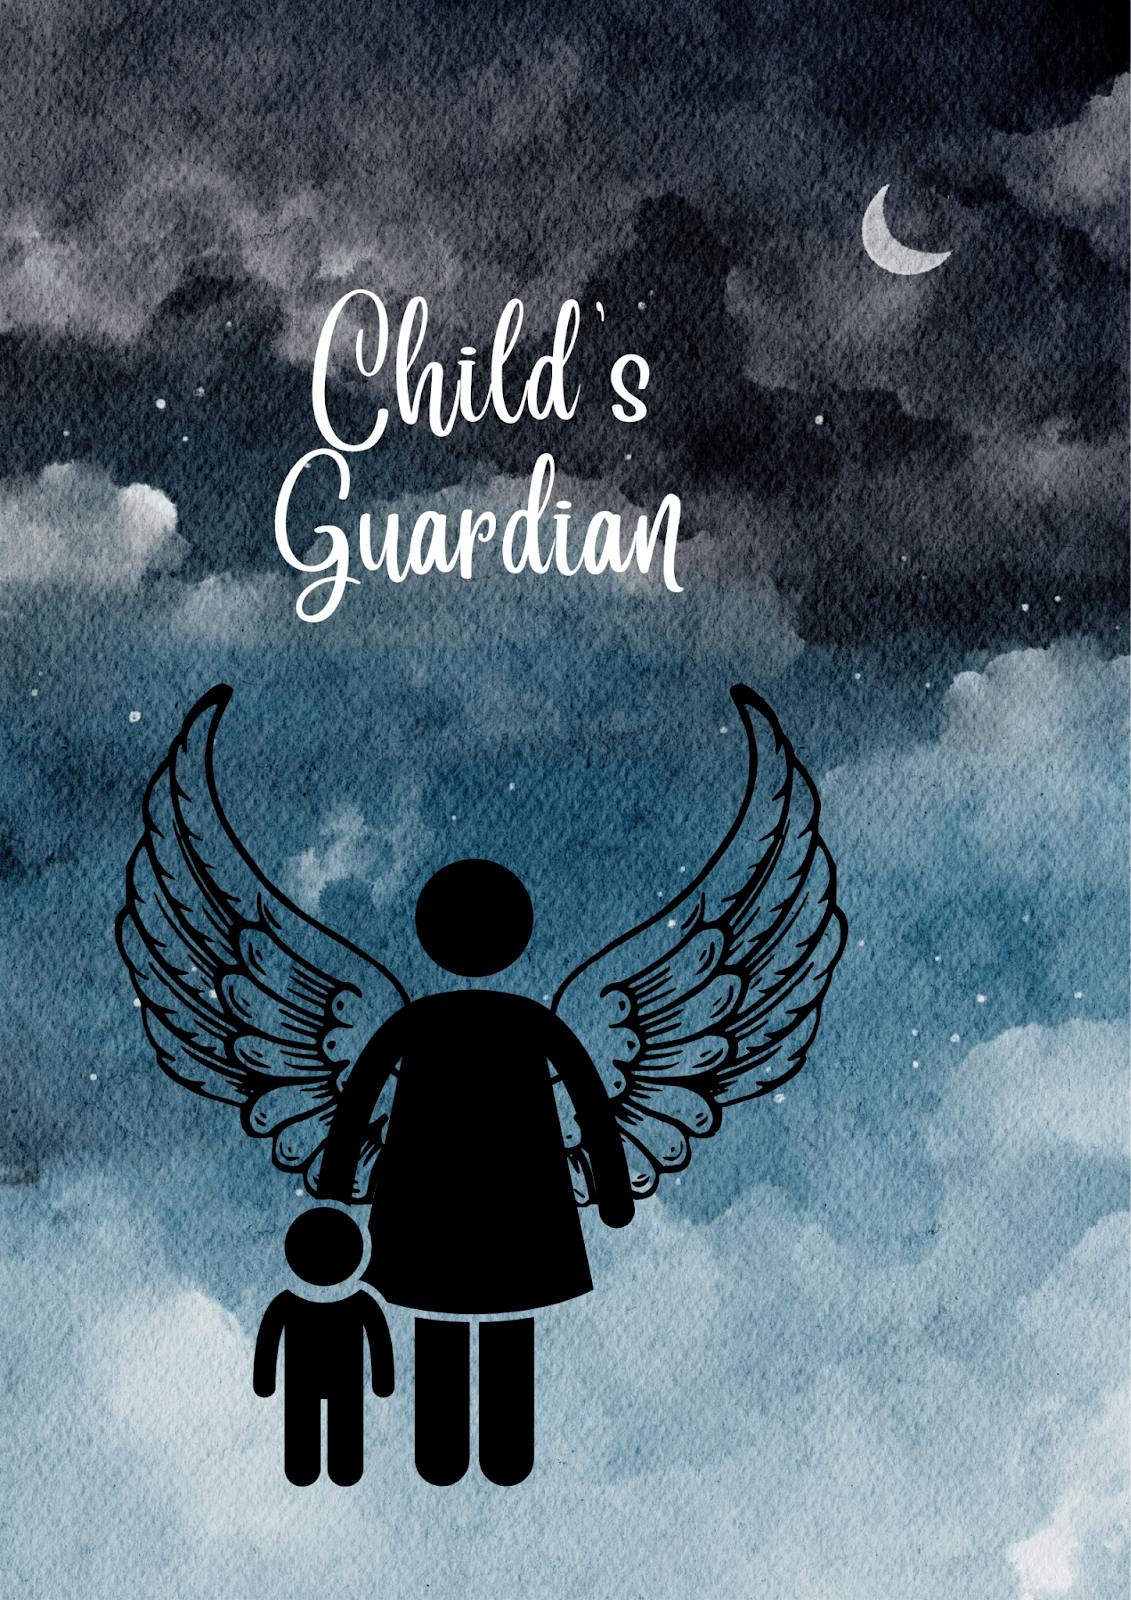 Role of Child's Guardian